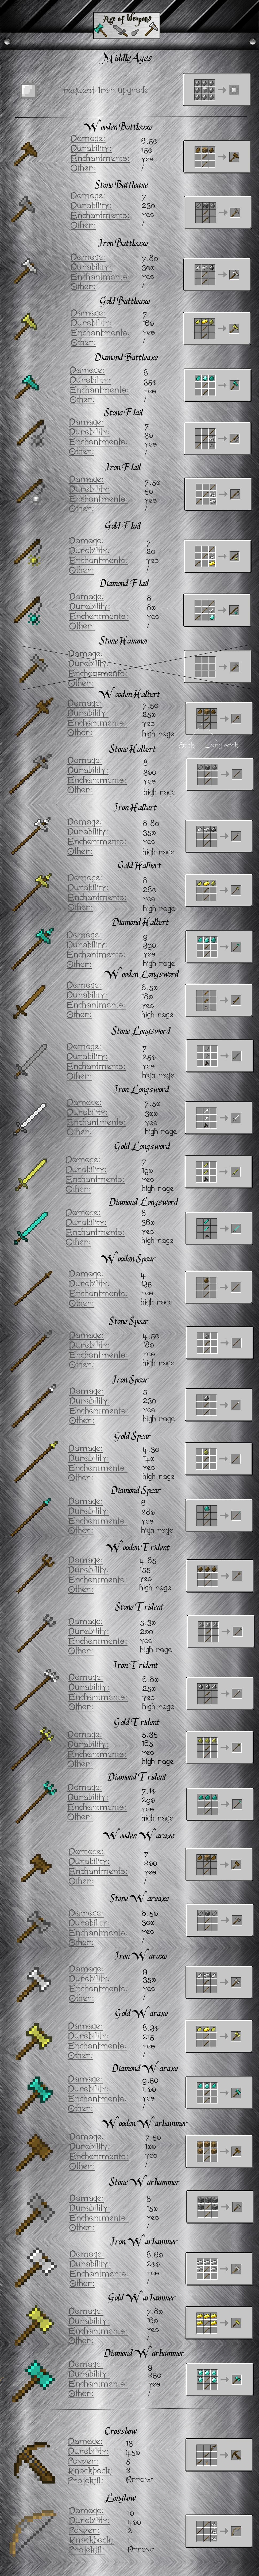 Age of Weapons Mod Crafting Recipes 8